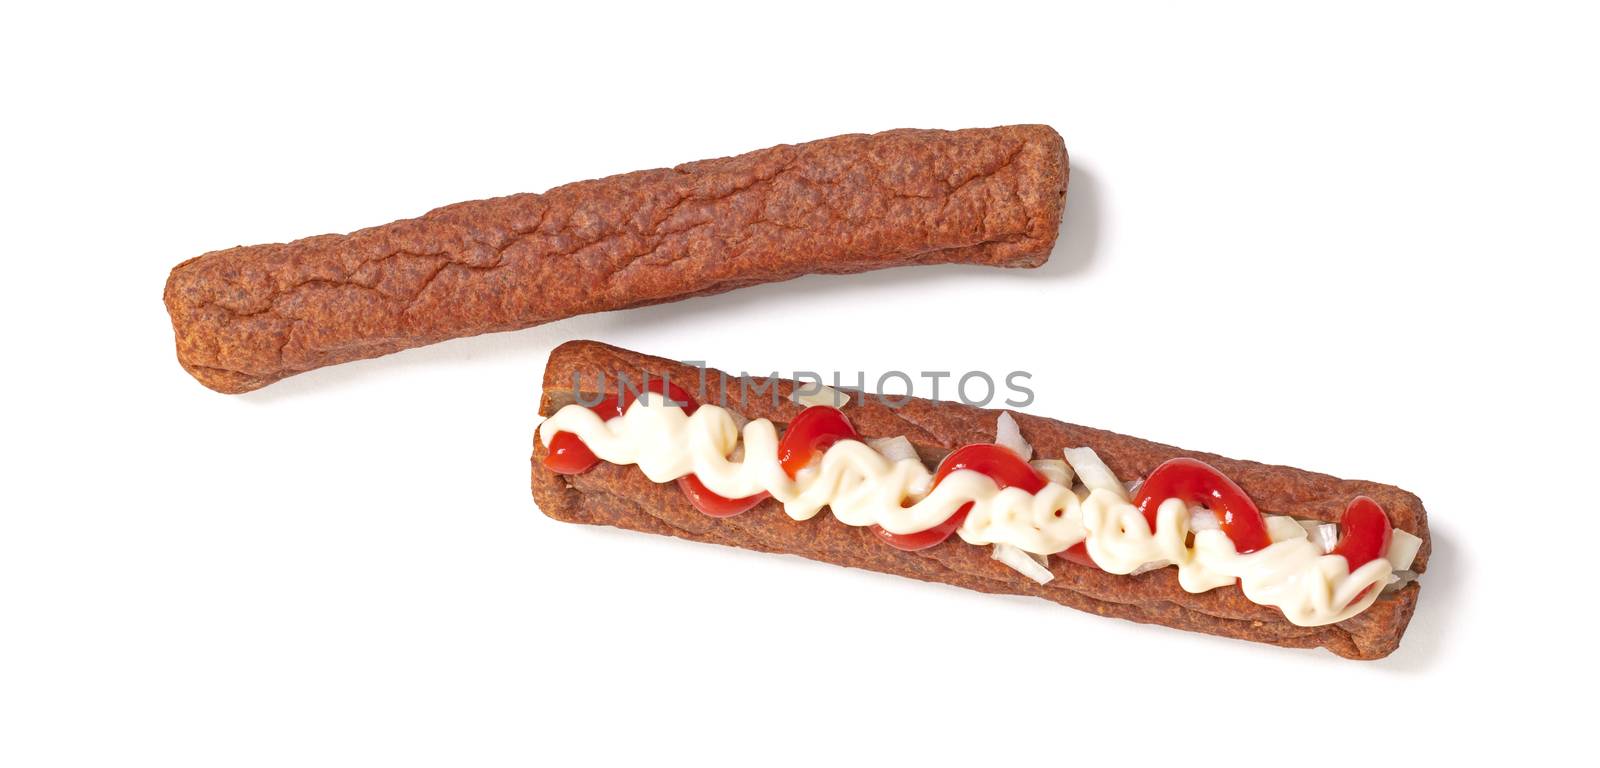 One frikadel with ketchup, mayonnaise on chopped onions, a Dutch by michaklootwijk